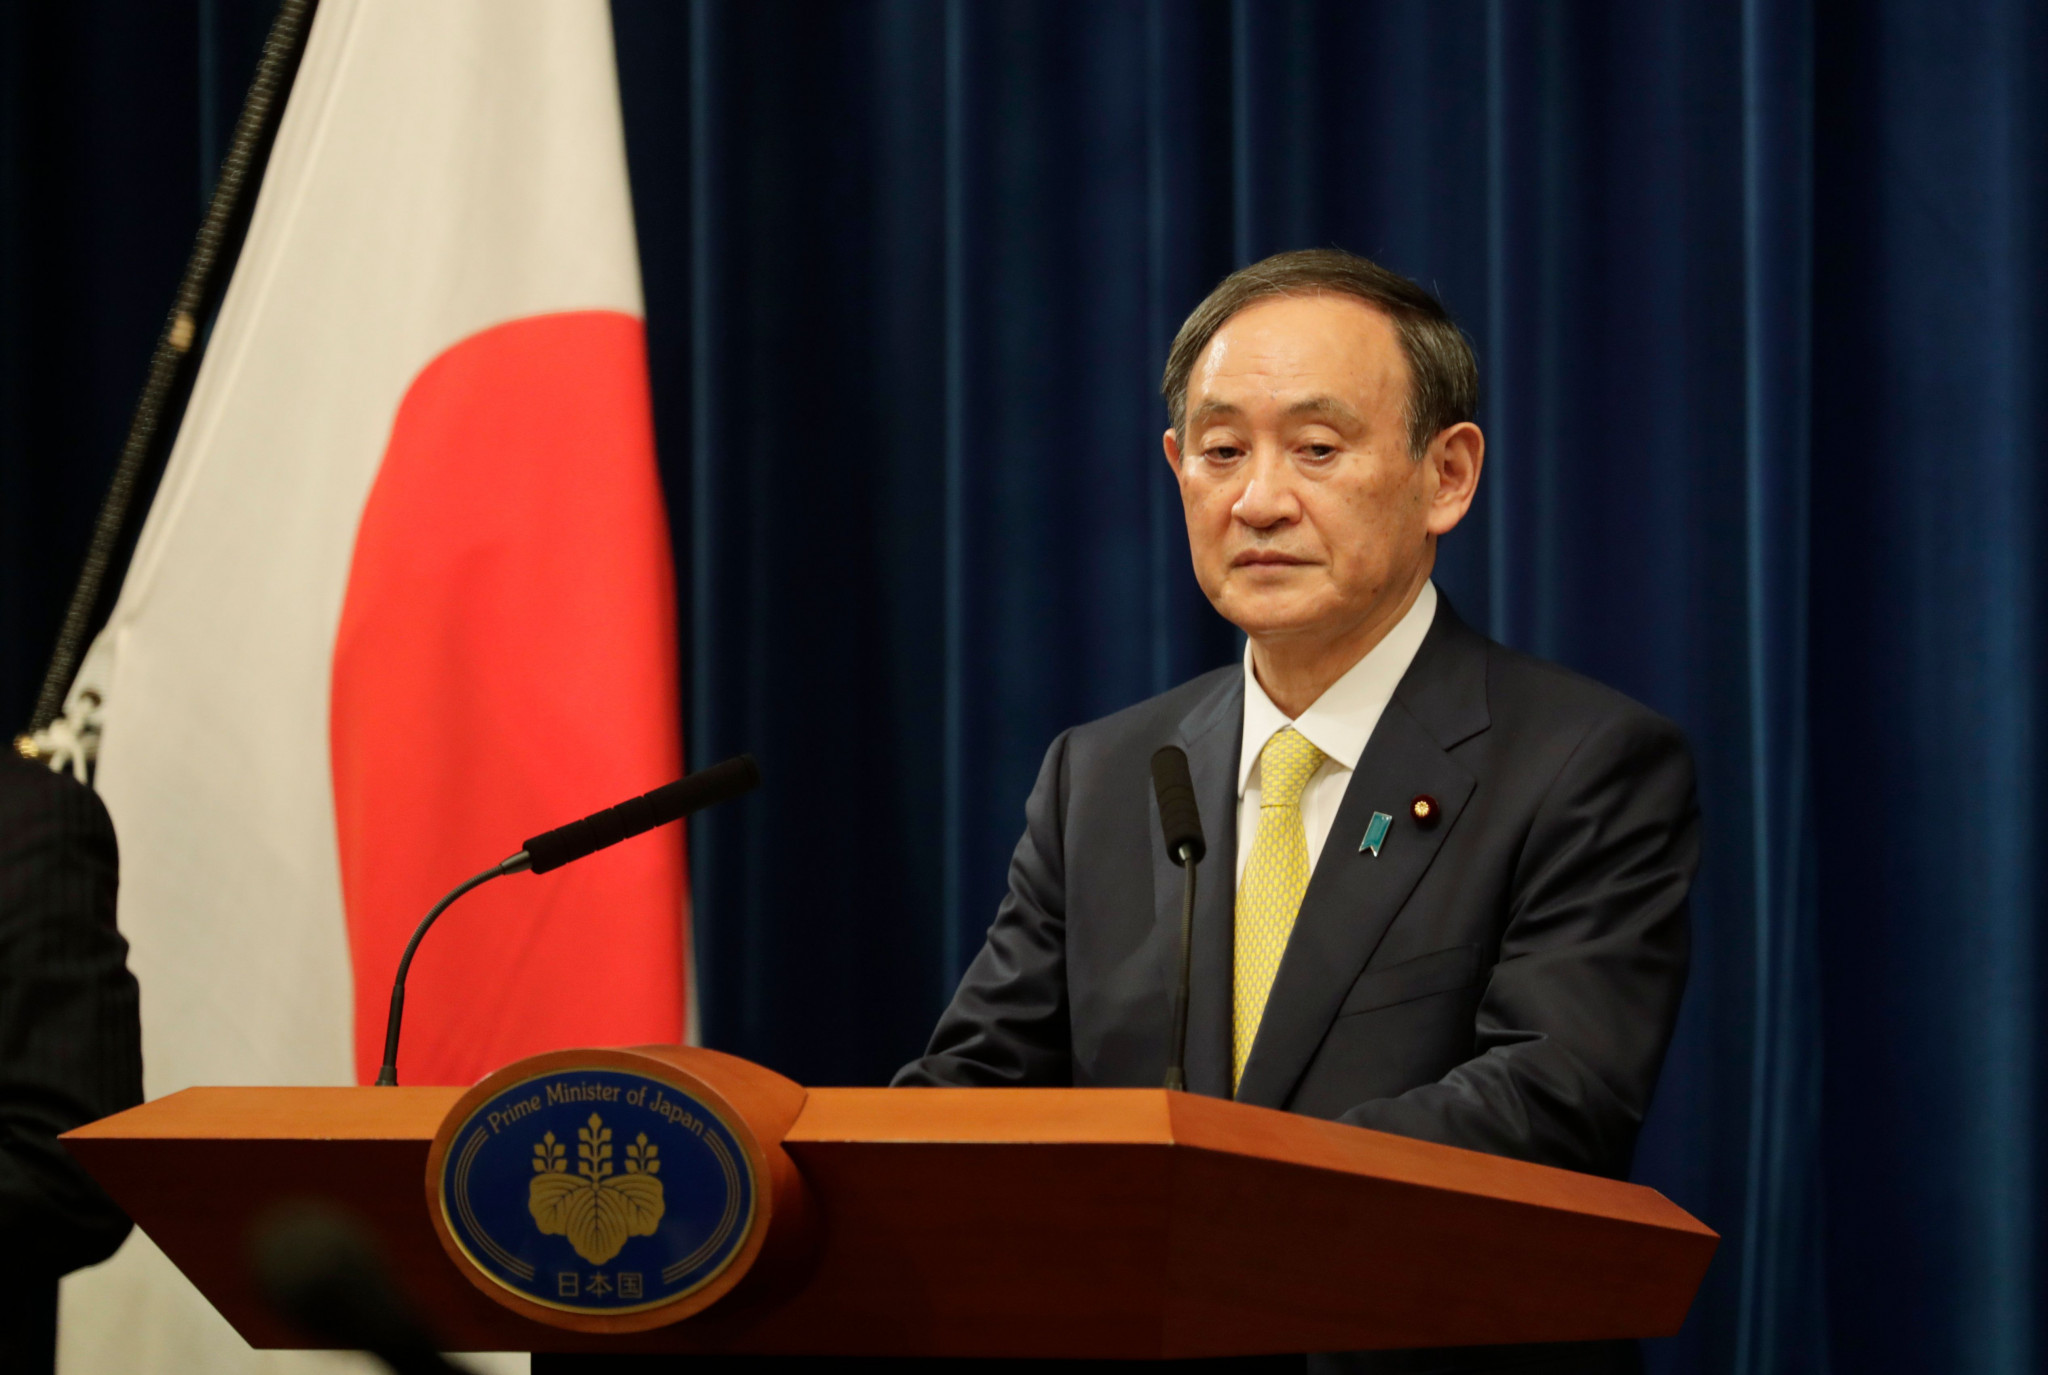 Japanese Prime Minister Suga to "spare no effort" to hold "safe and secure" Tokyo 2020